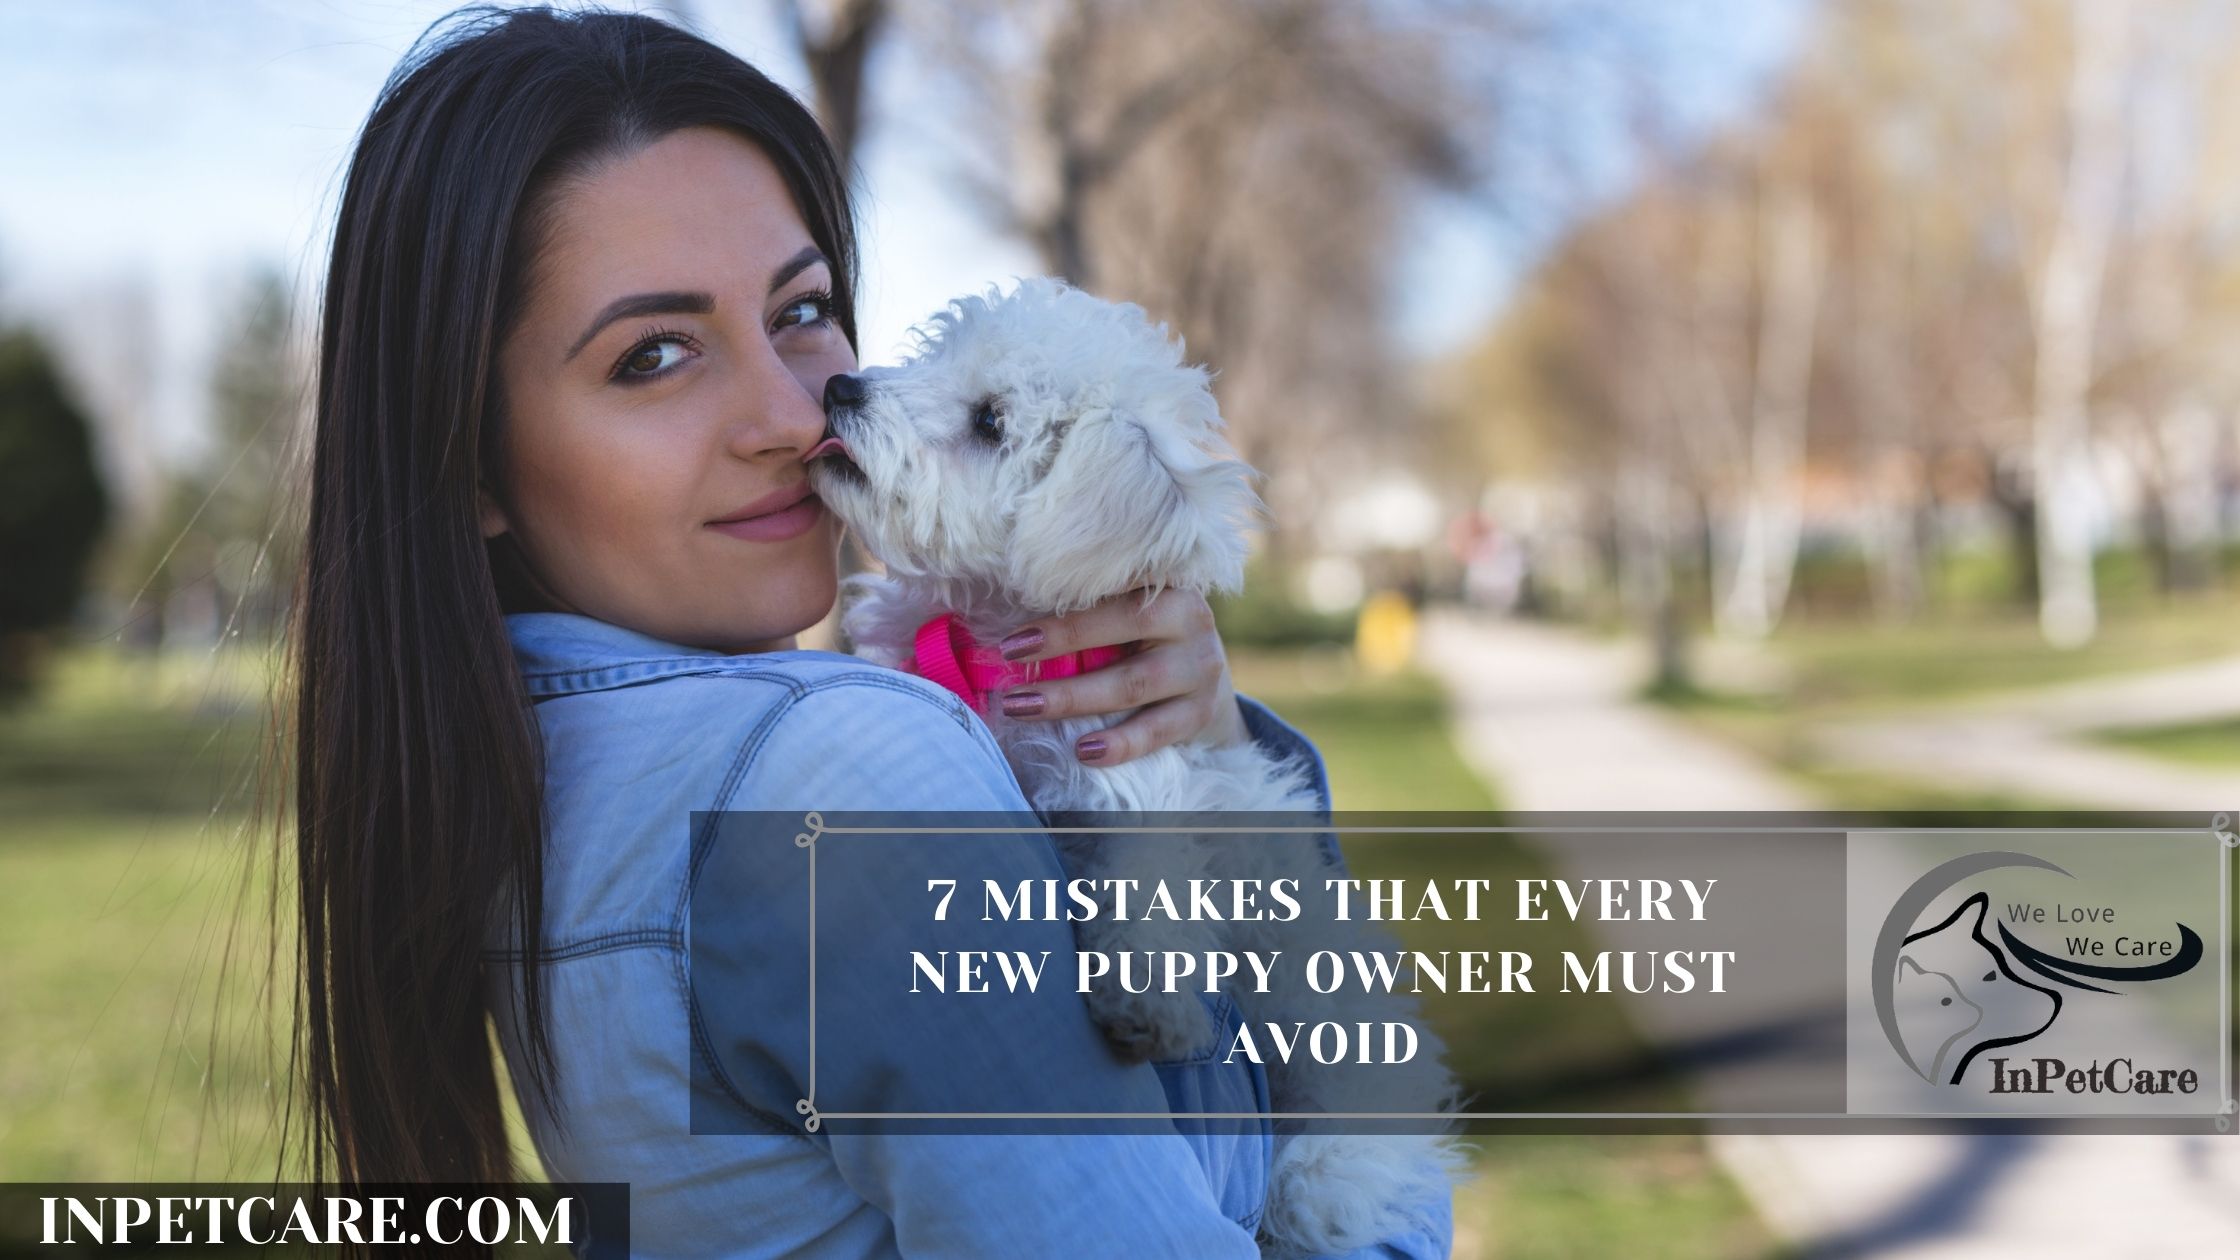  7 Mistakes That Every New Puppy Owner Must Avoid